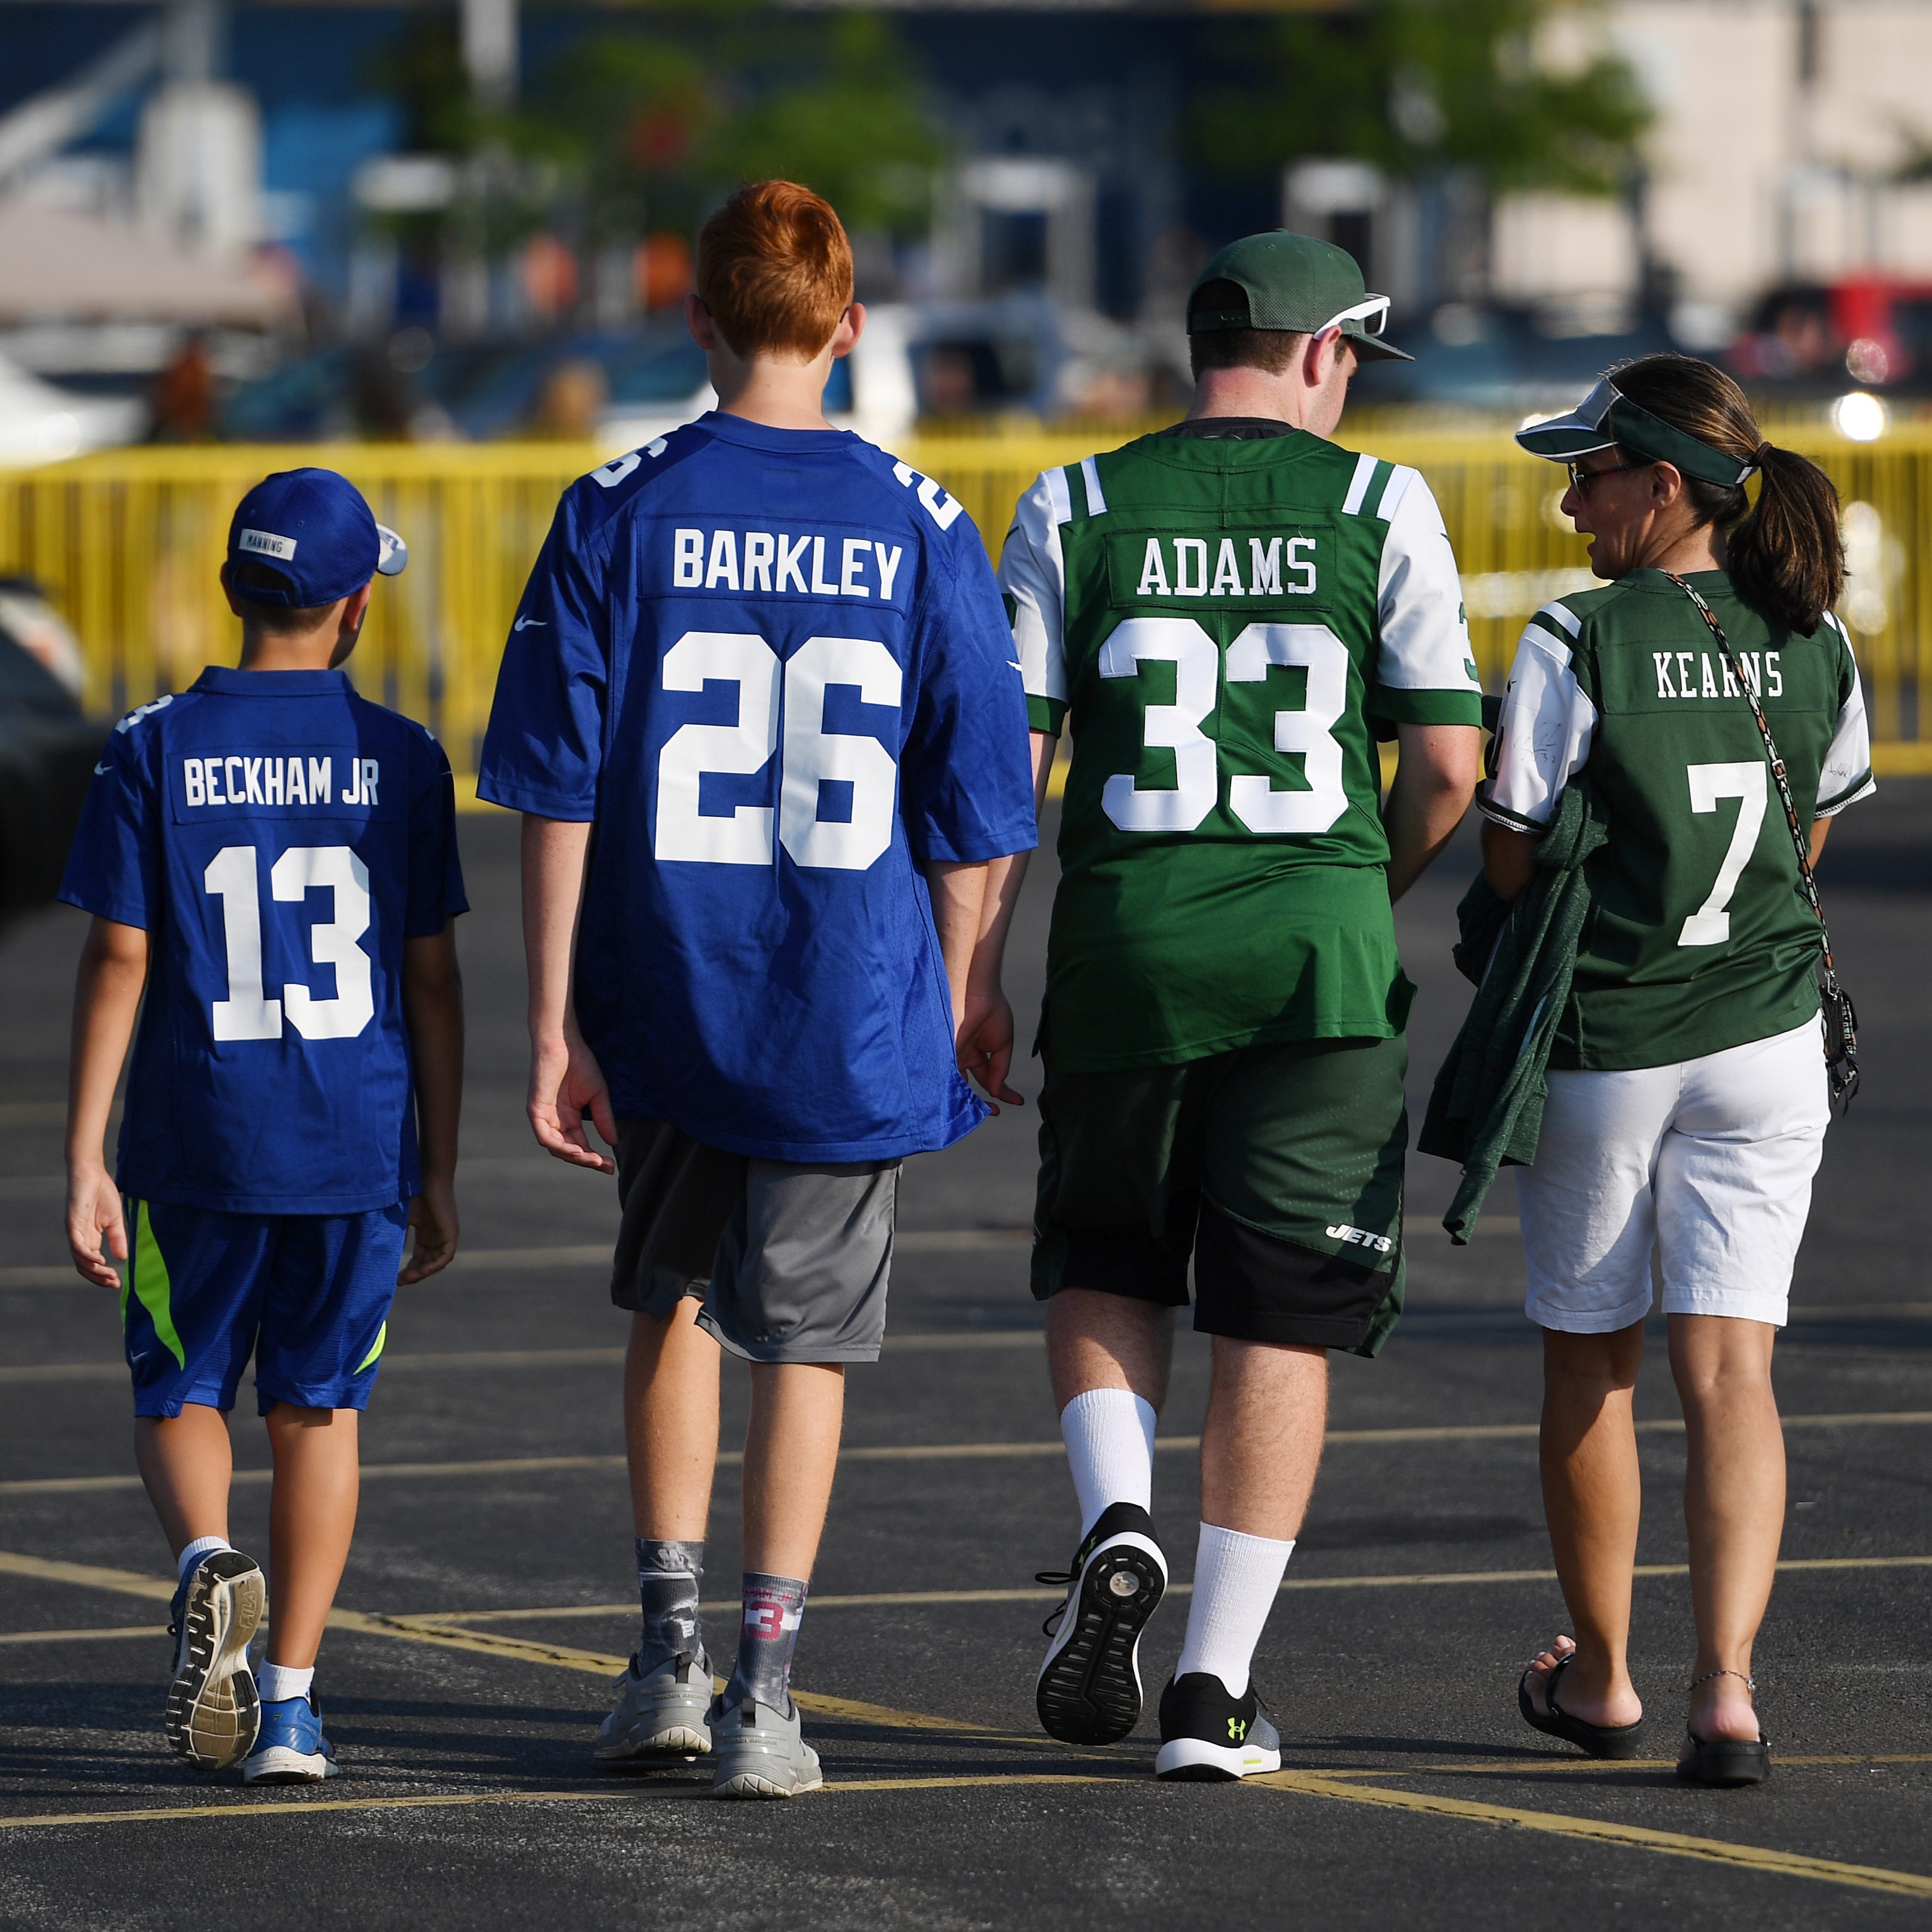 Join our NY Giants and NY Jets fan Facebook groups for the 2018 season